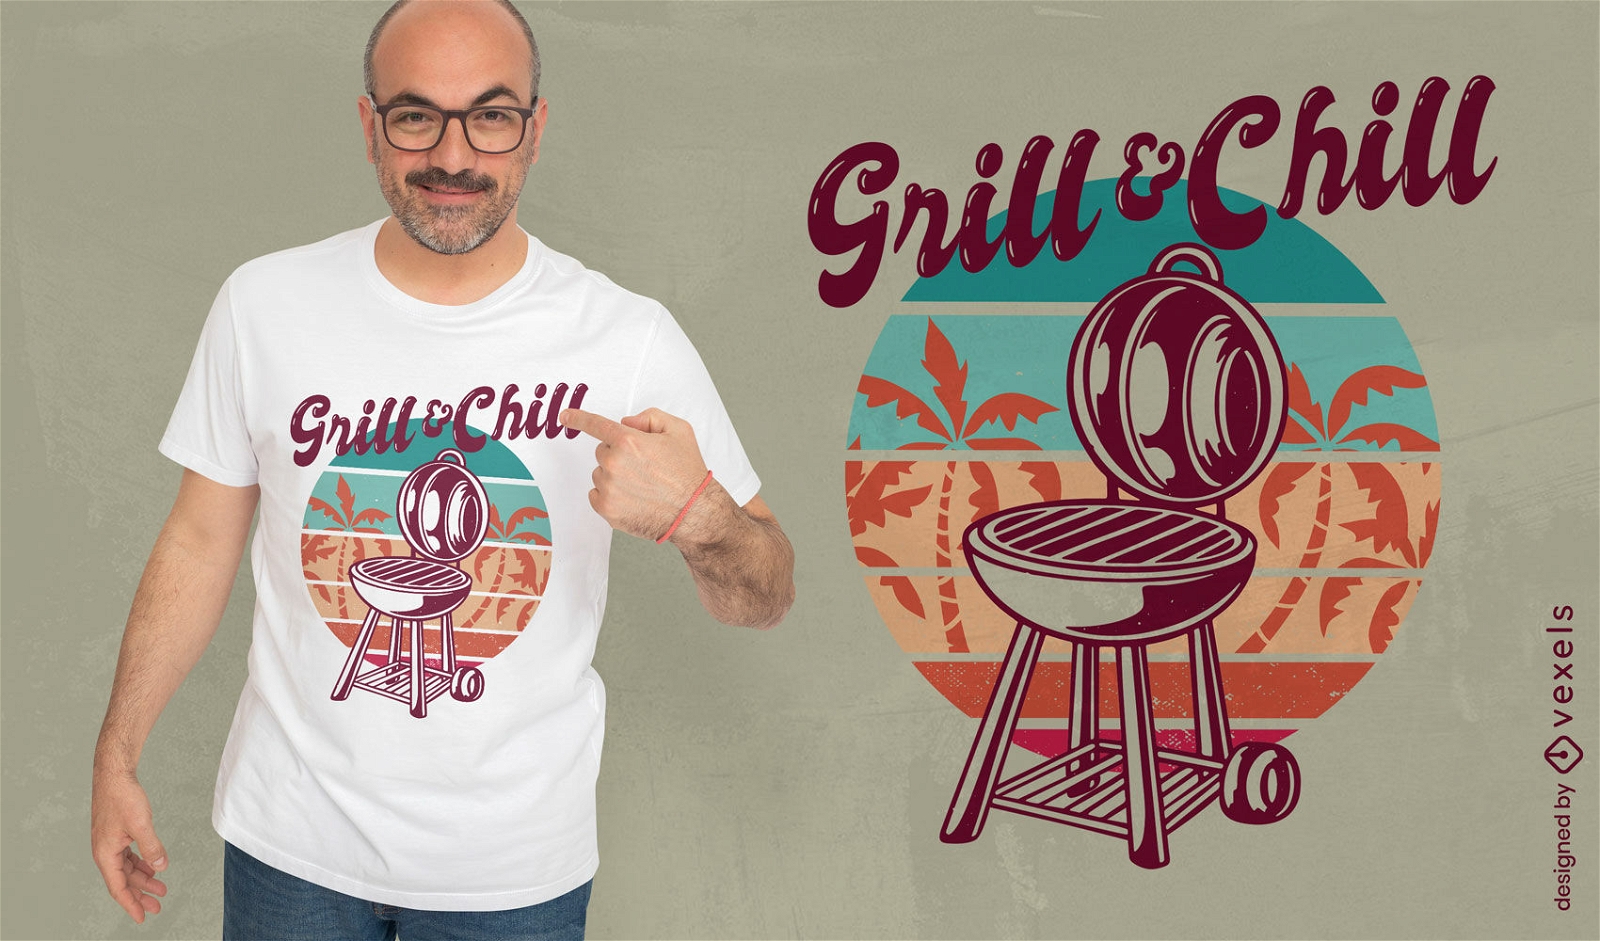 Dise?o de camiseta chill and grill.